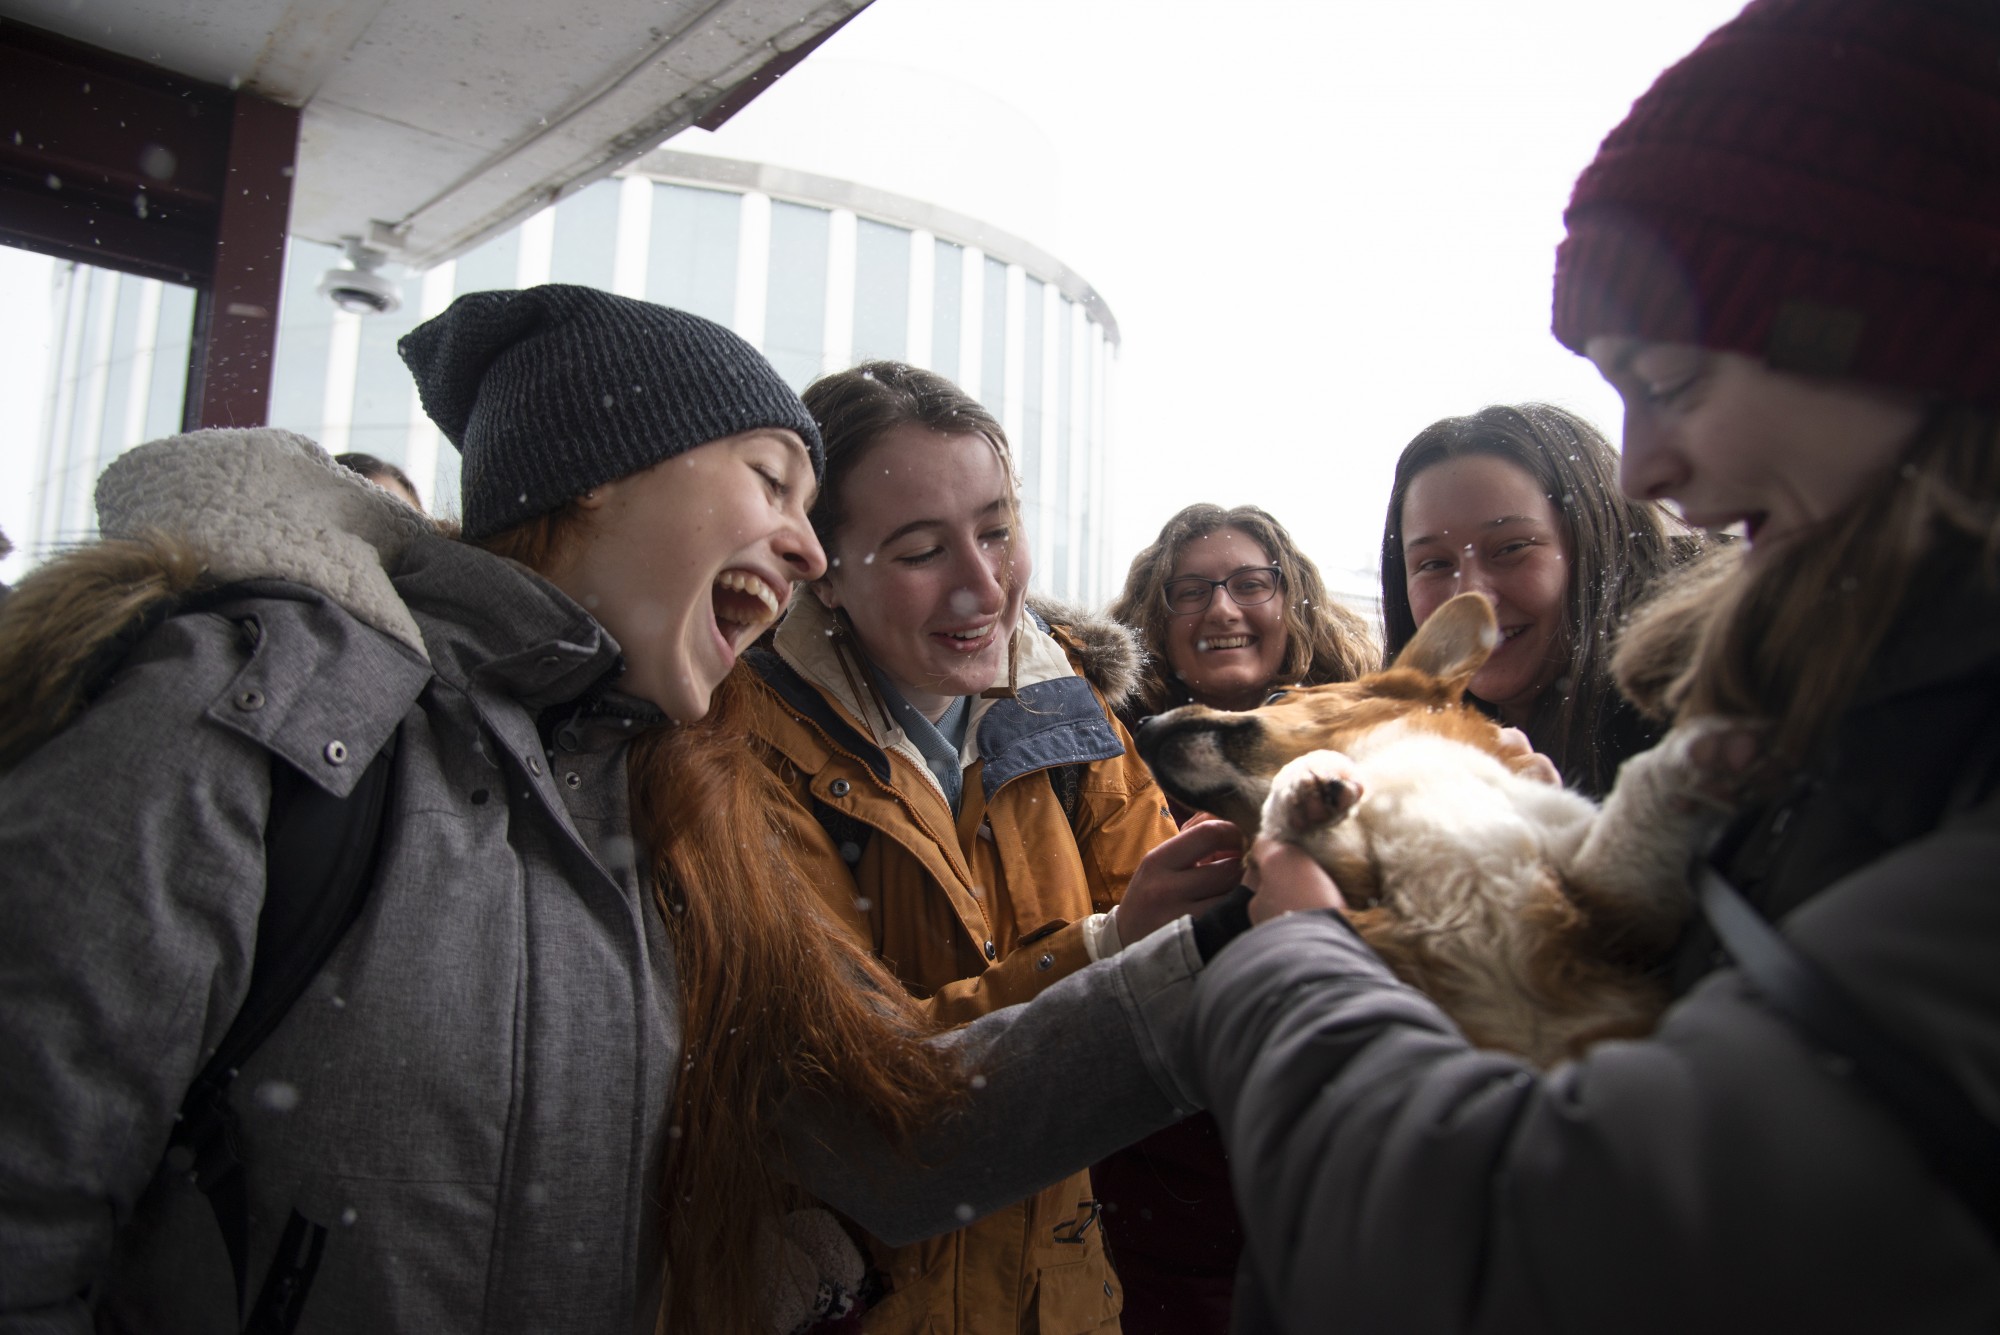 A crowd gathers on the Washington Avenue Bridge to greet Butter the Chemistry Corgi on Friday, Jan. 30. Bach Nguyen, Butter’s owner, regularly brings the 6 month old dog to his chemistry TA office hours and runs an instagram account, butter_the_chemistry_corgi. 